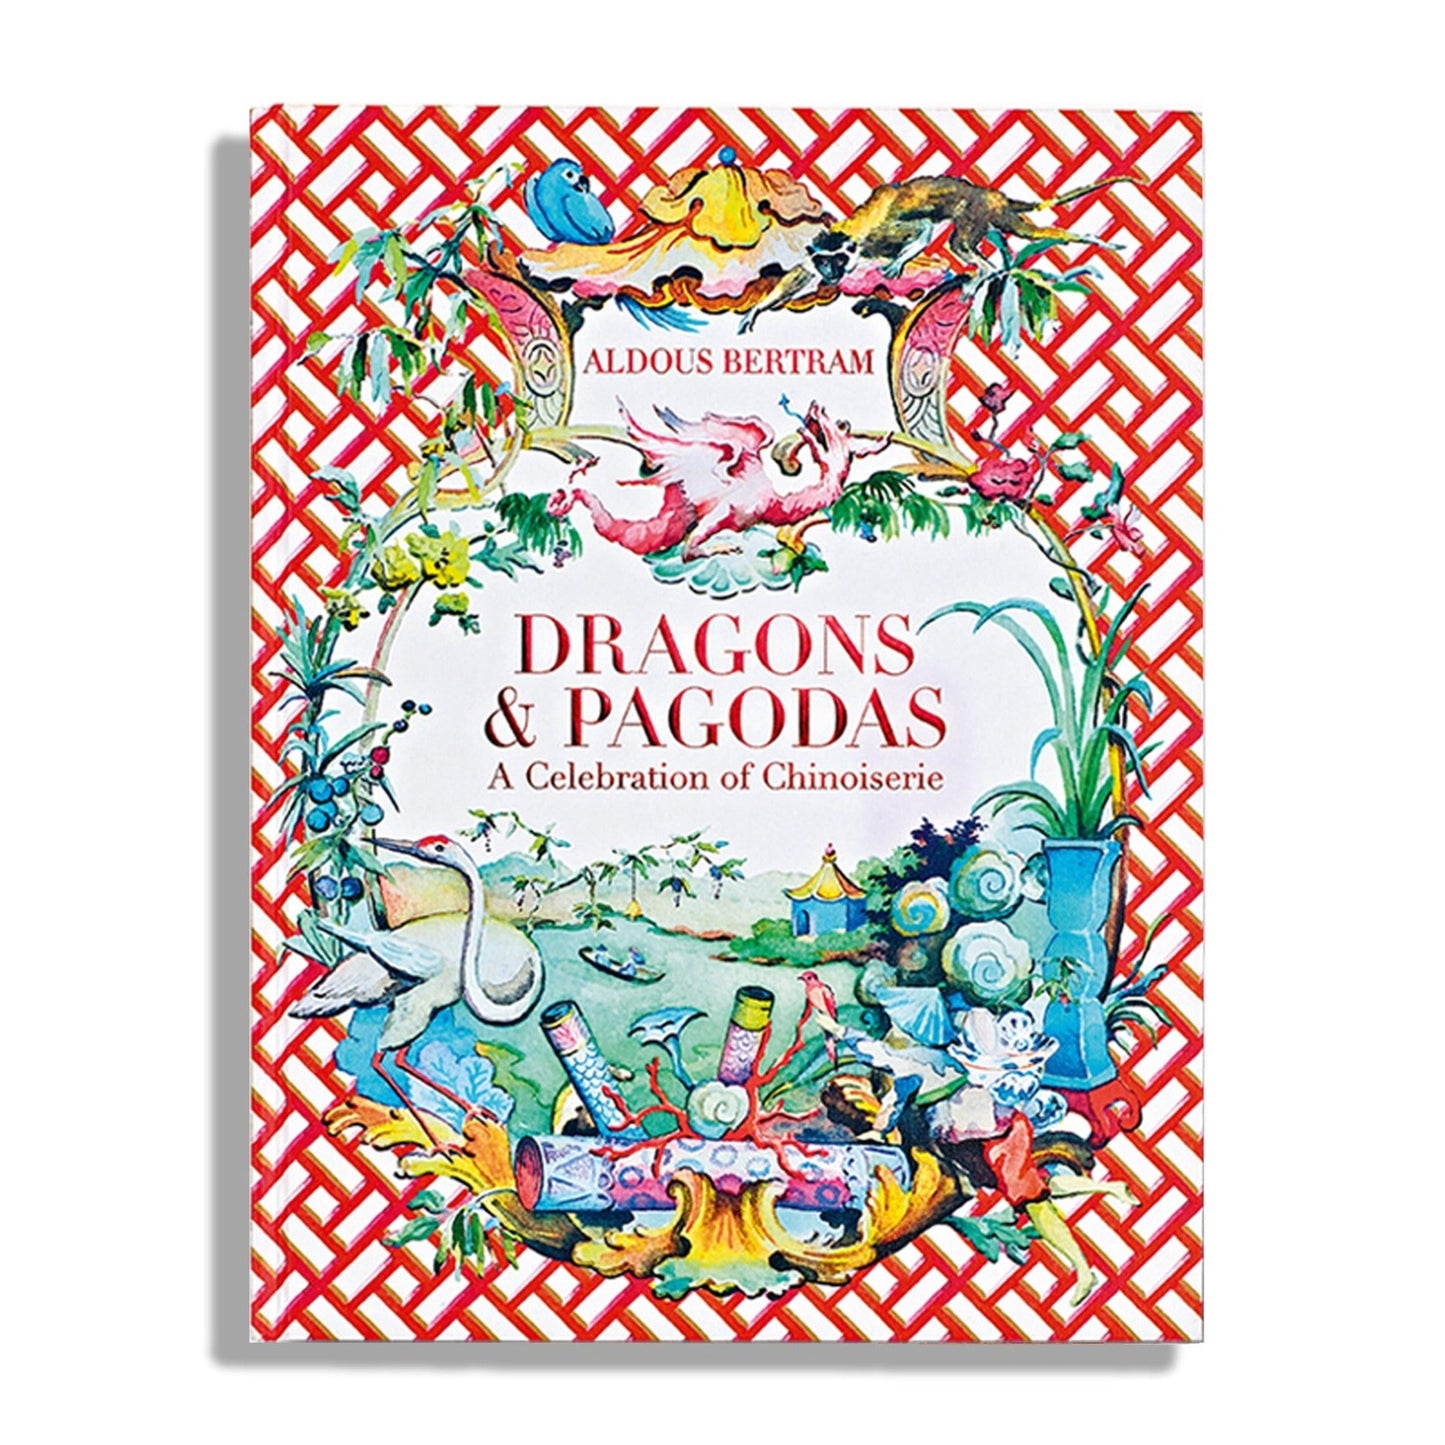 Dragons & Pagodas: A Celebration of Chinoiserie – Signature Edition